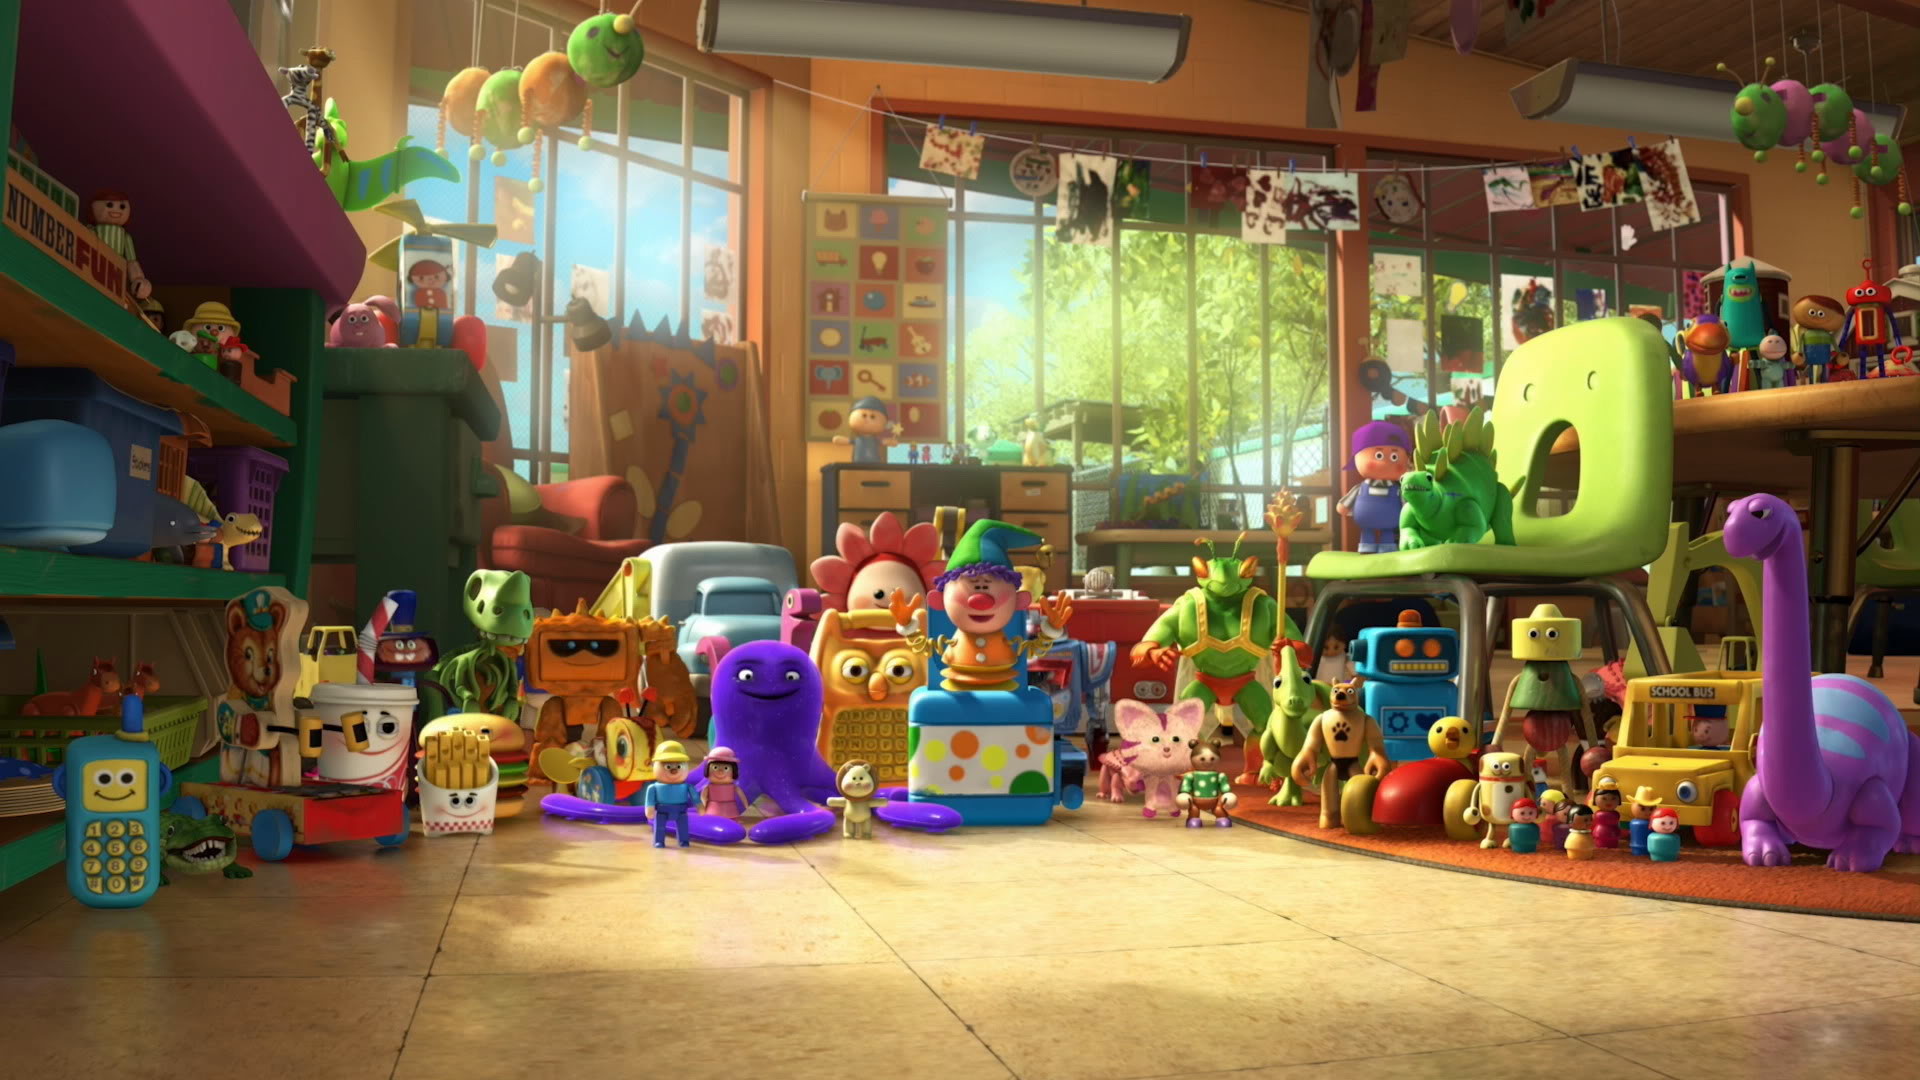 1920x1080 Toy Story 3 HD Wallpaper | Background Image |  | ID:333917 -  Wallpaper Abyss